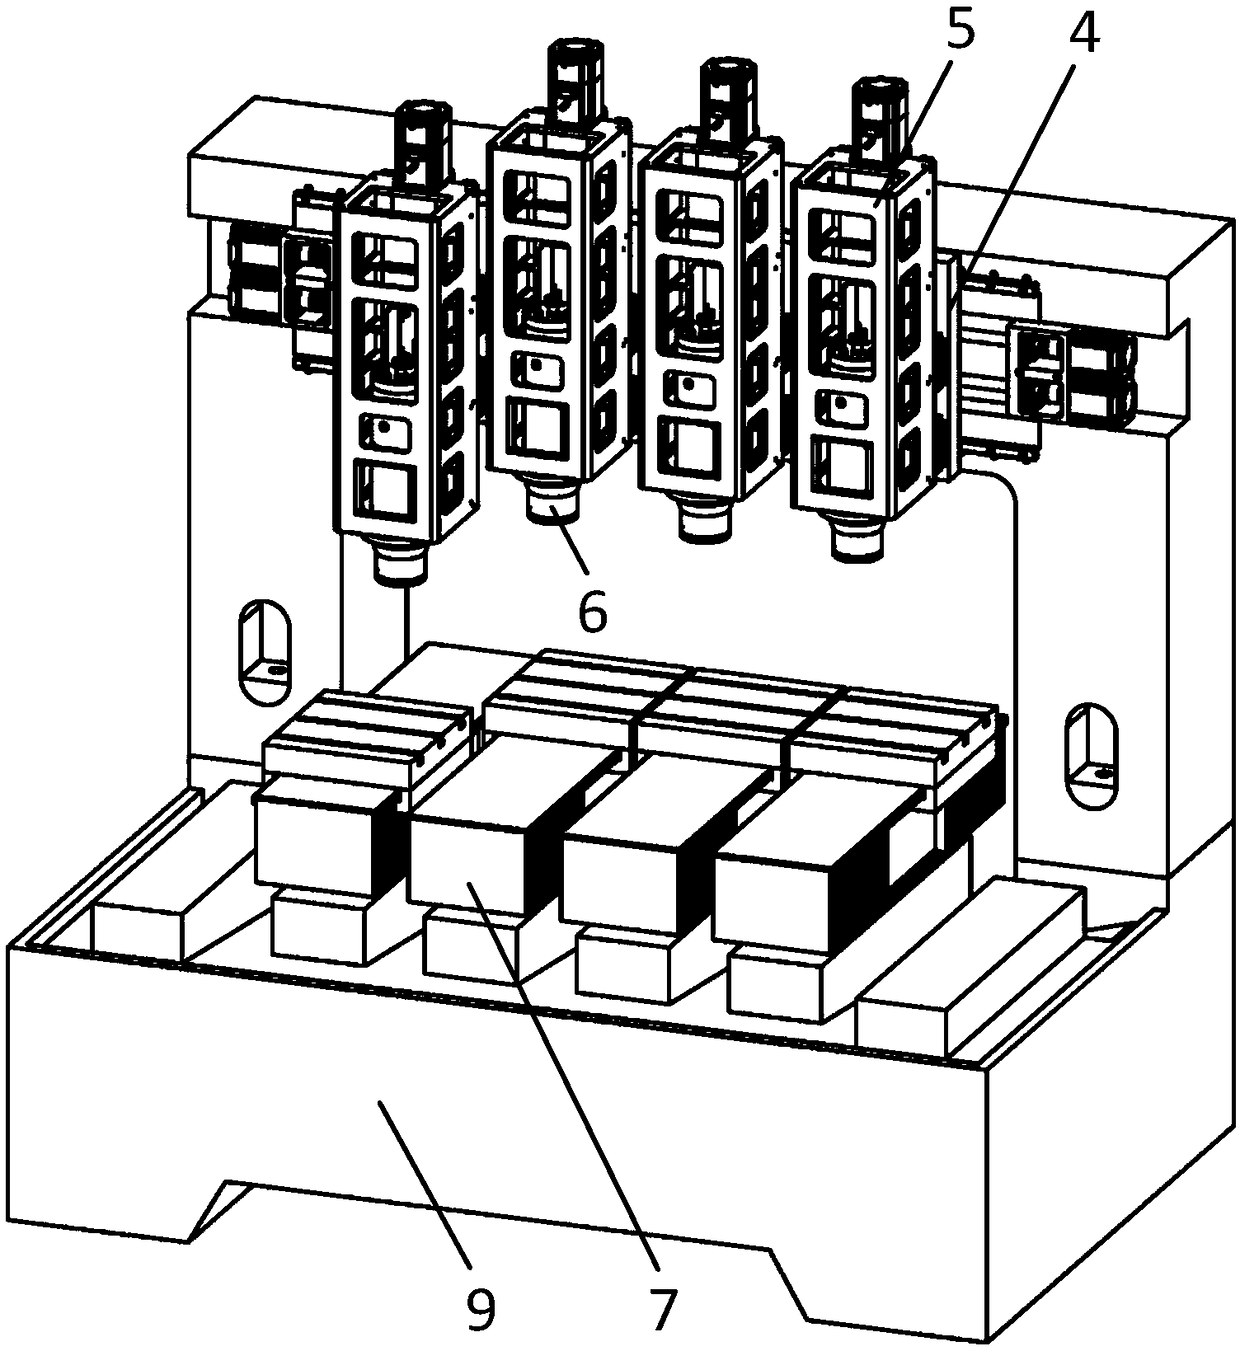 Parallel multi-channel numerical control machine tool